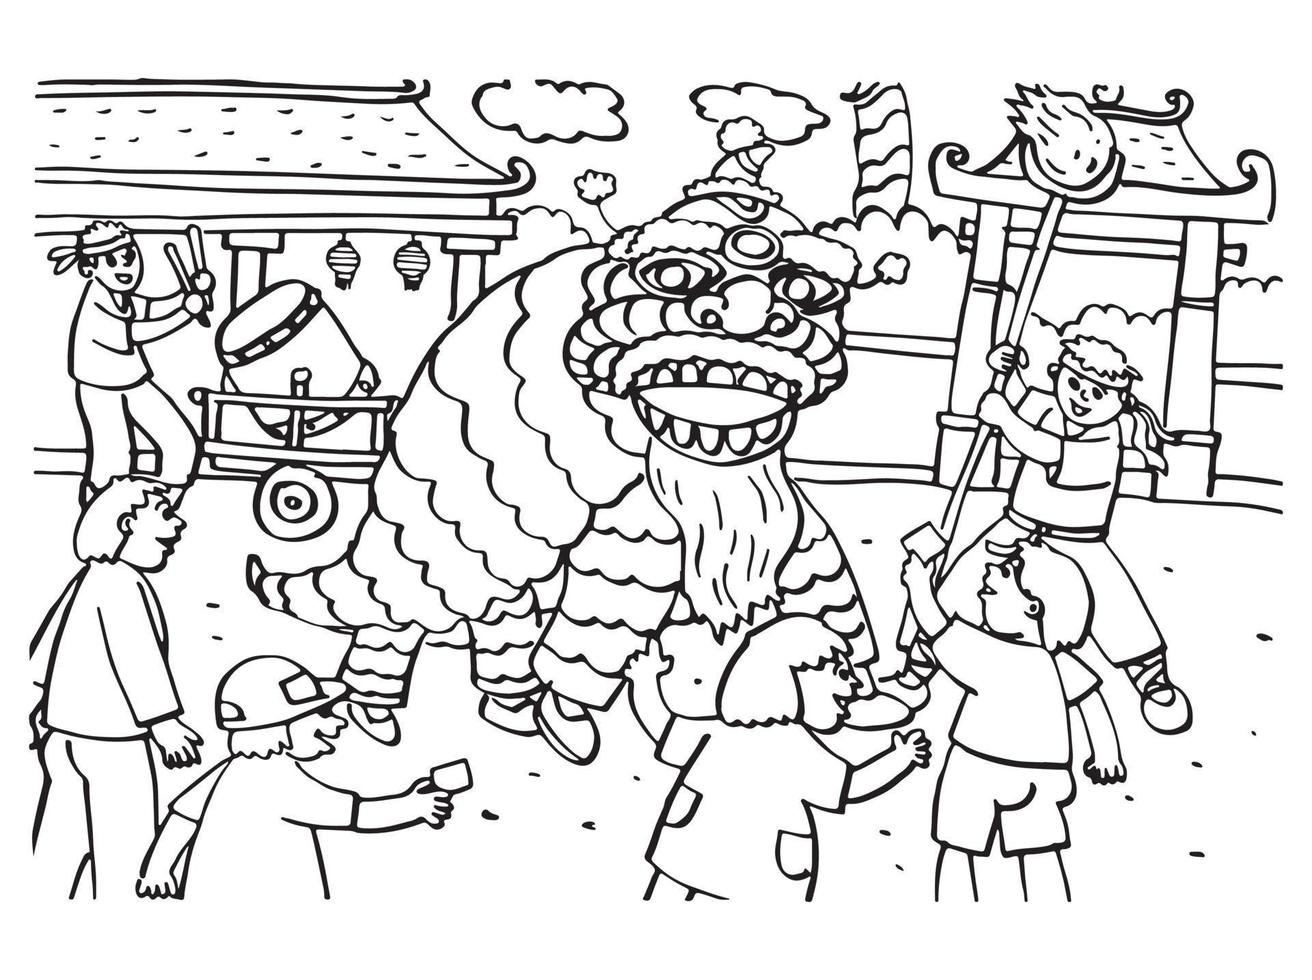 Vector illustration of people are celebrating chinese new year. Suitable for coloring book, coloring pages, poster, etc